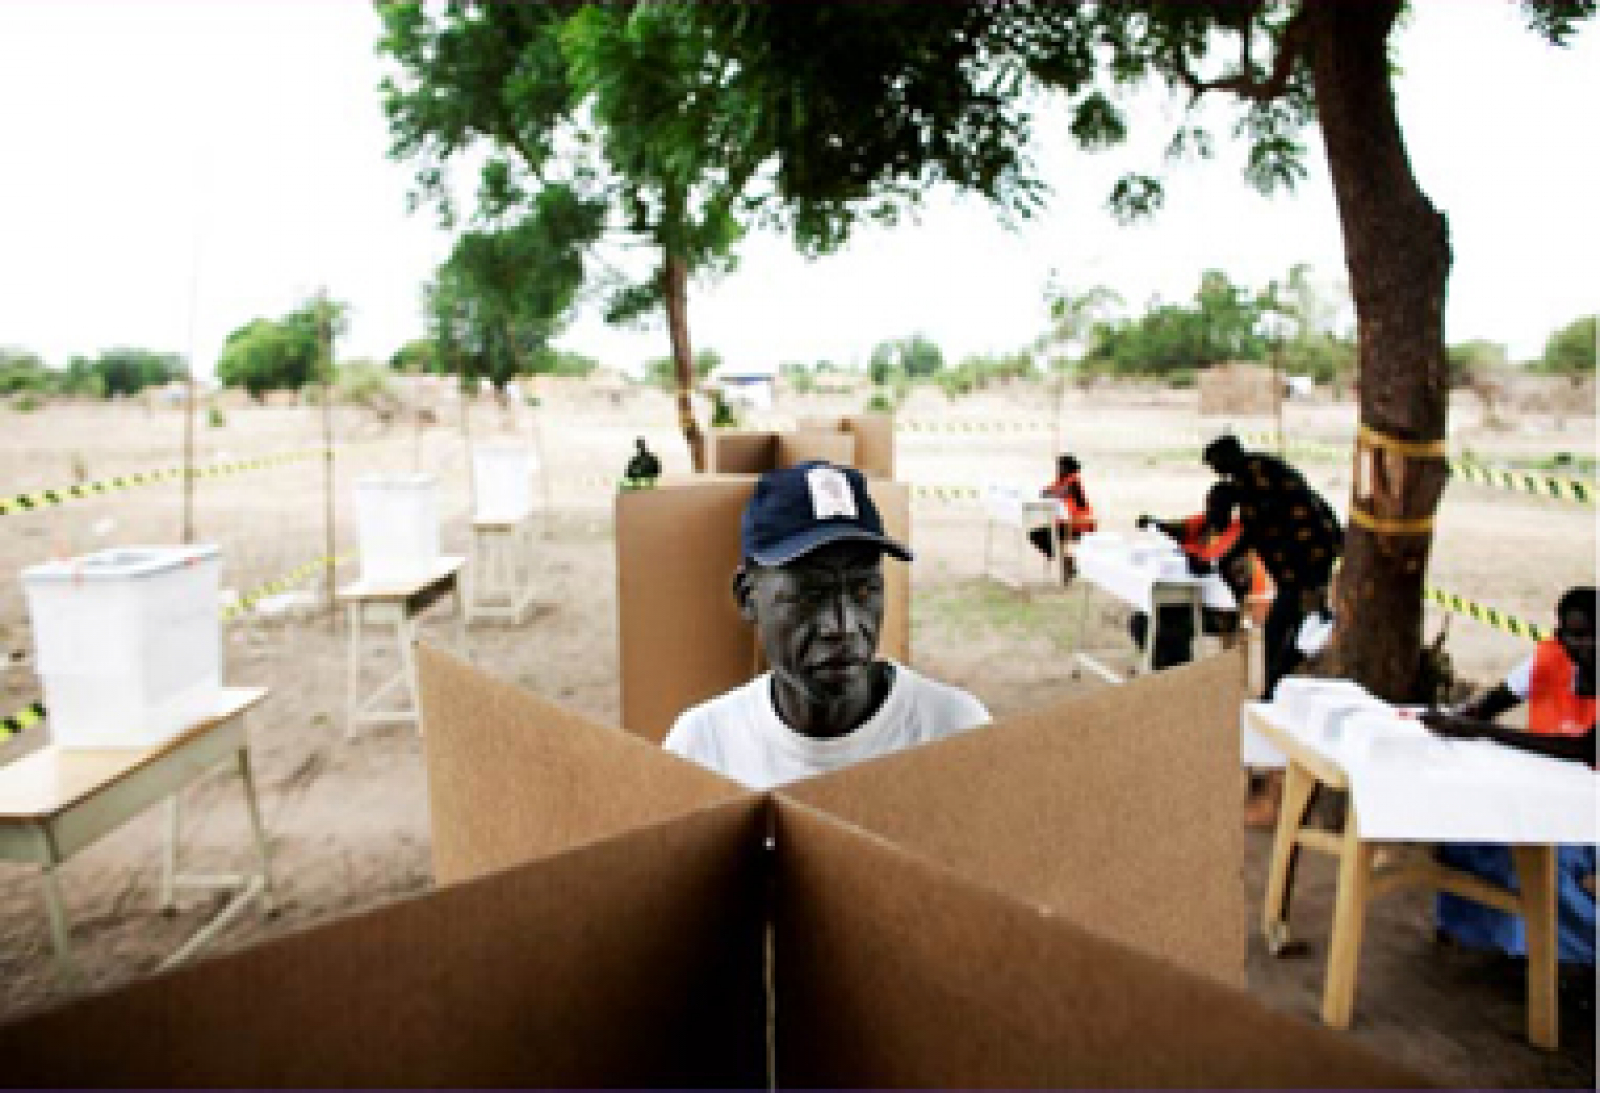 Southern Sudan Citizens Share Their Views on the Referendum